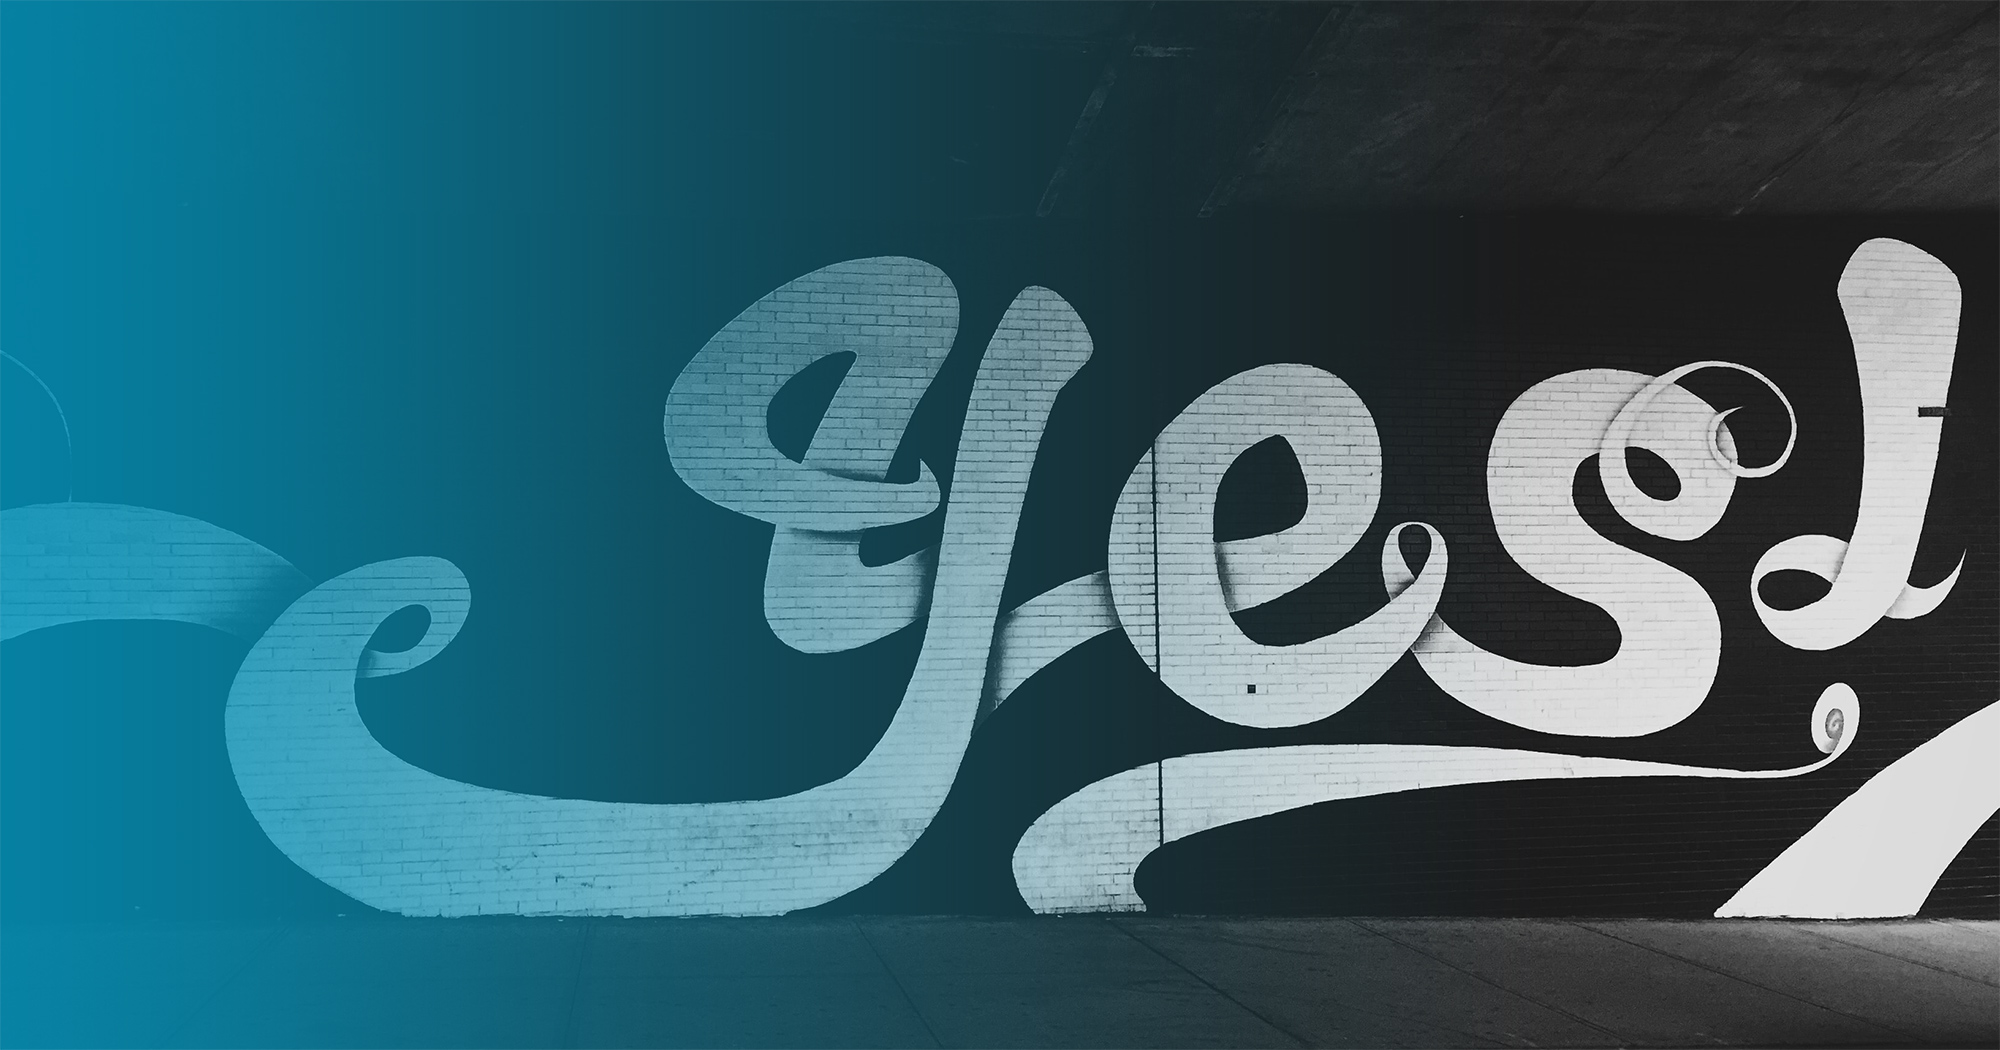 The word "Yes!" graffitied on a wall in black and white